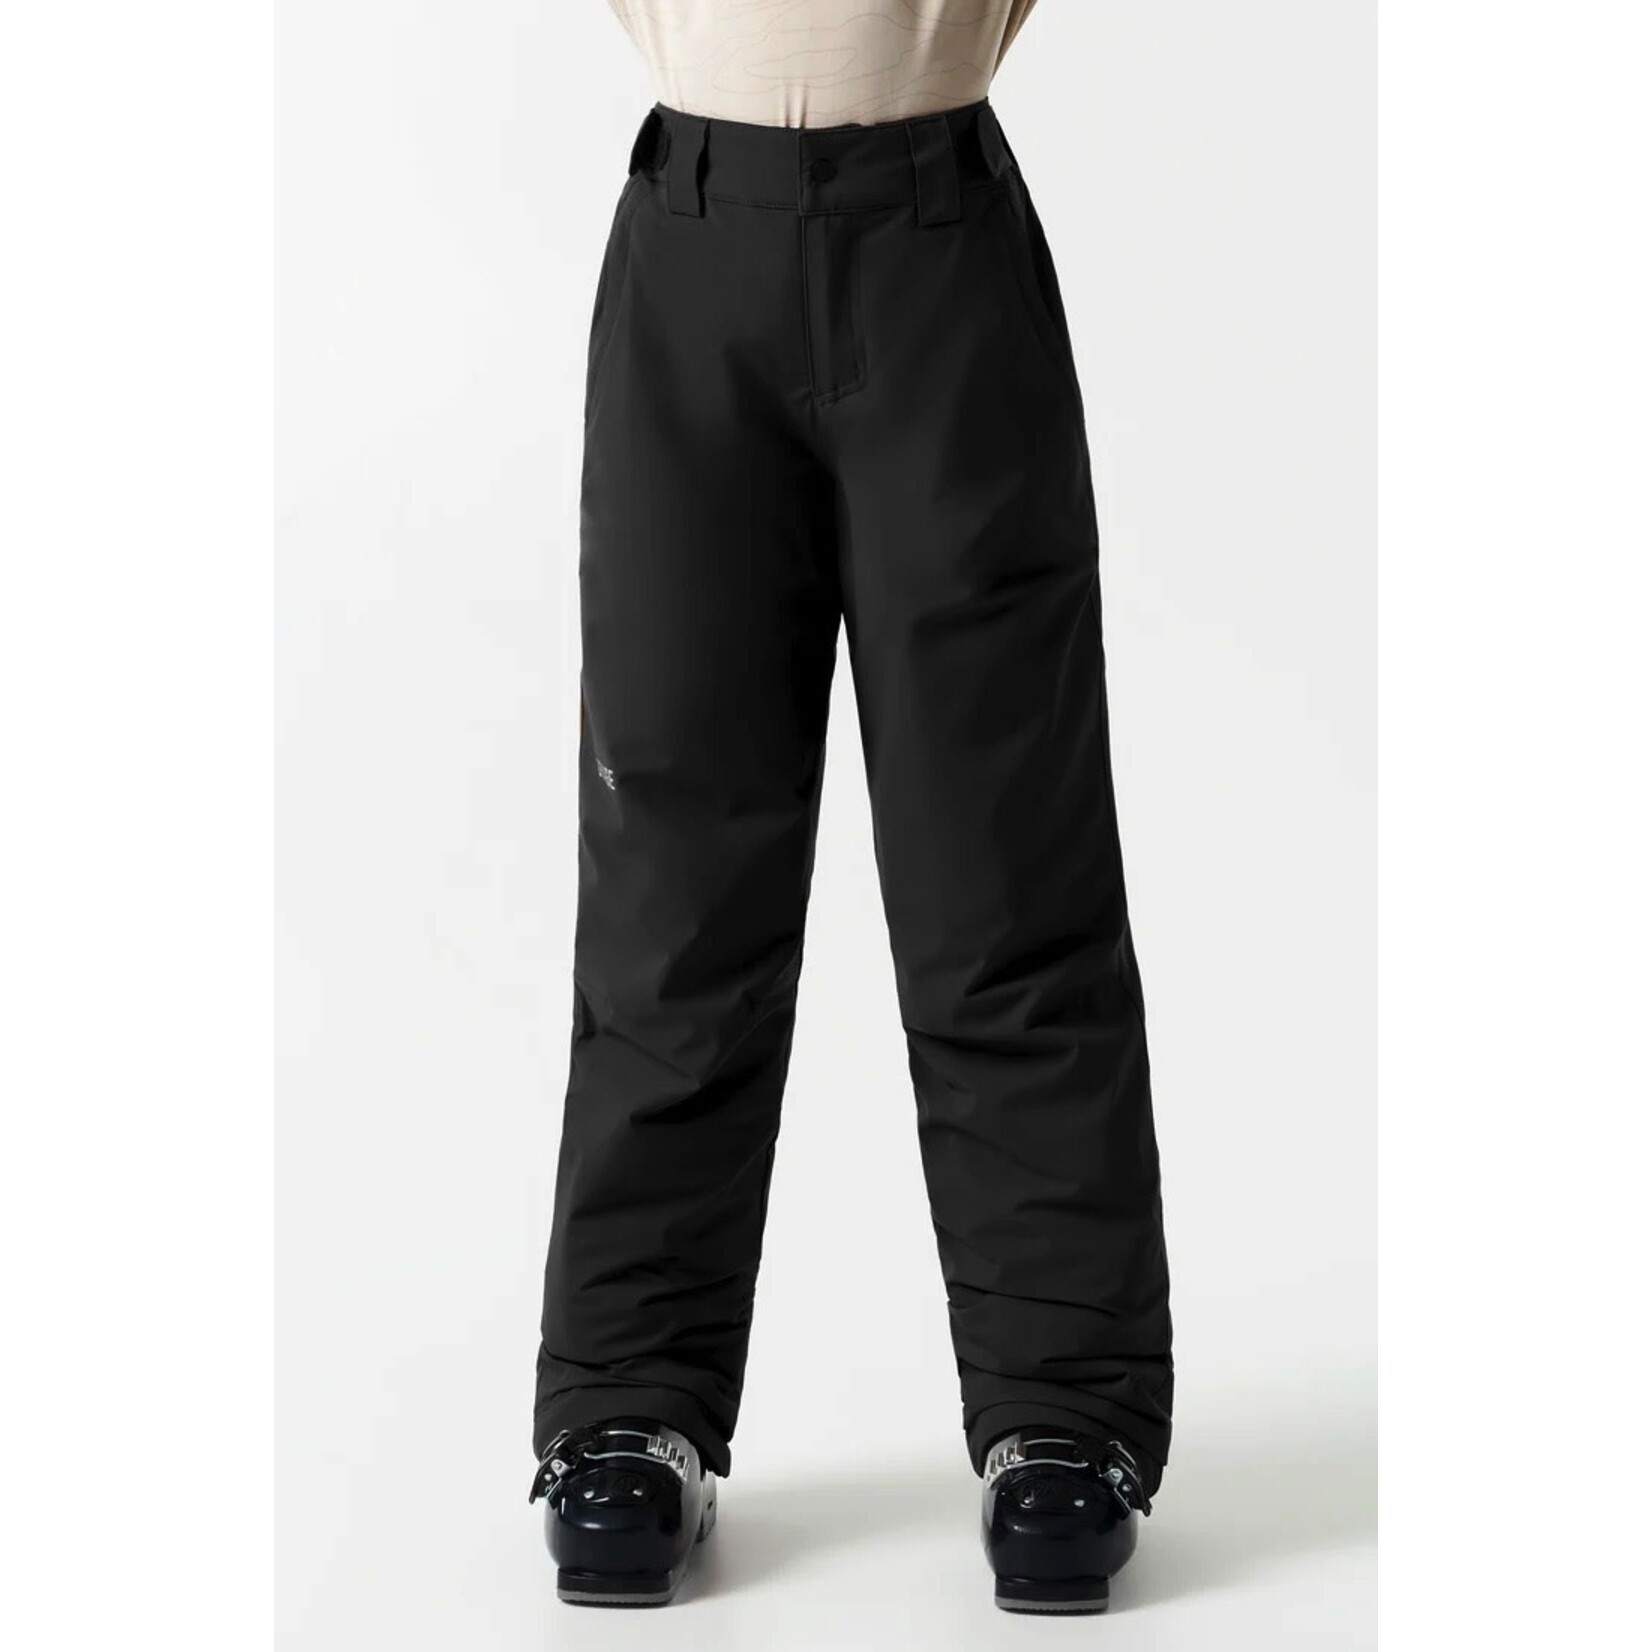 Orage Orage Youth Comi Insulated Pant